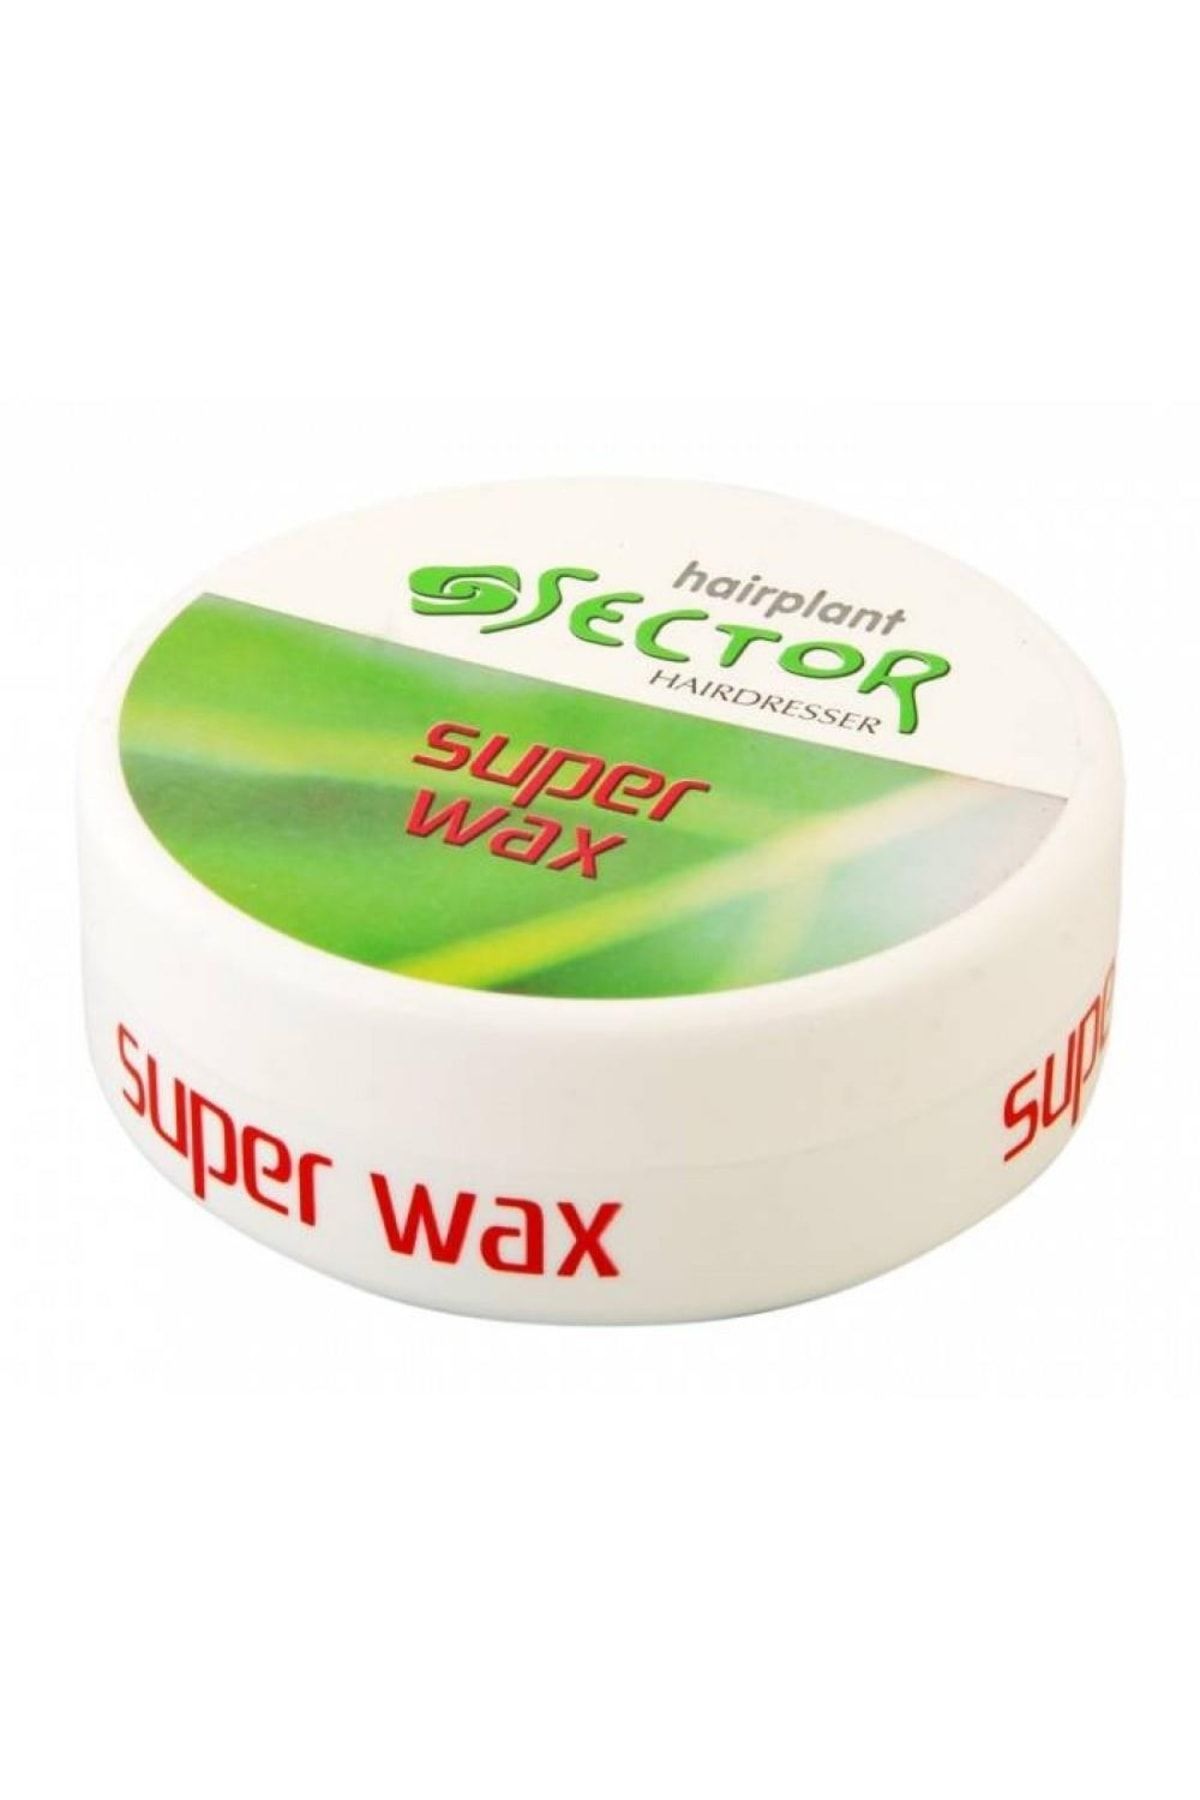 SECTOR WAX 150 ML HAIRPLANT NORMAL